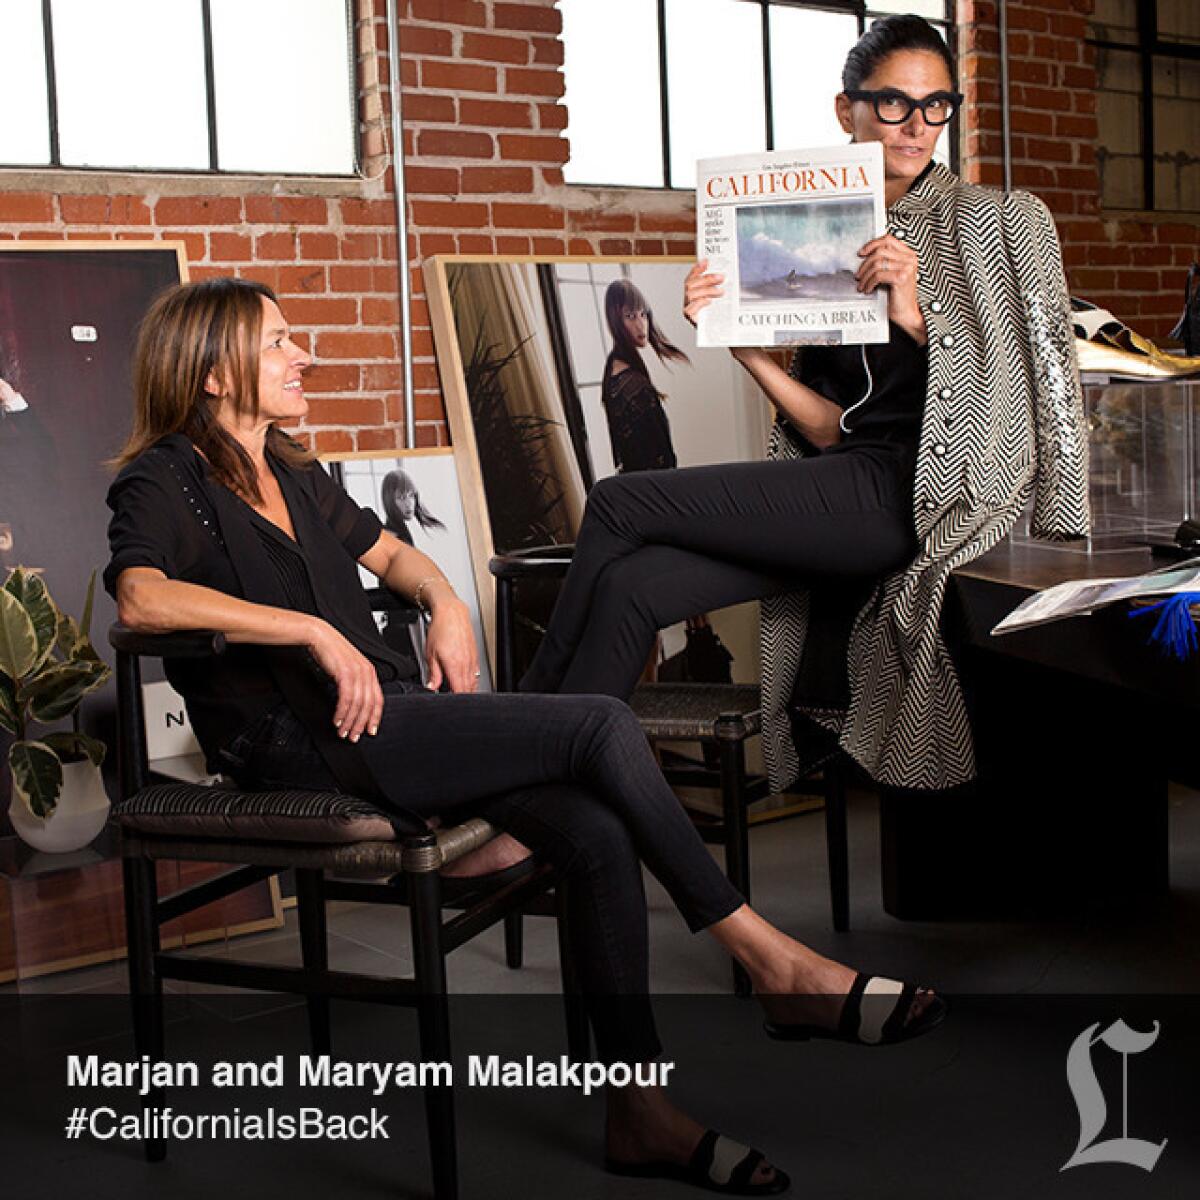 Marjan and Maryam Malakpour, Stylists and Designers.